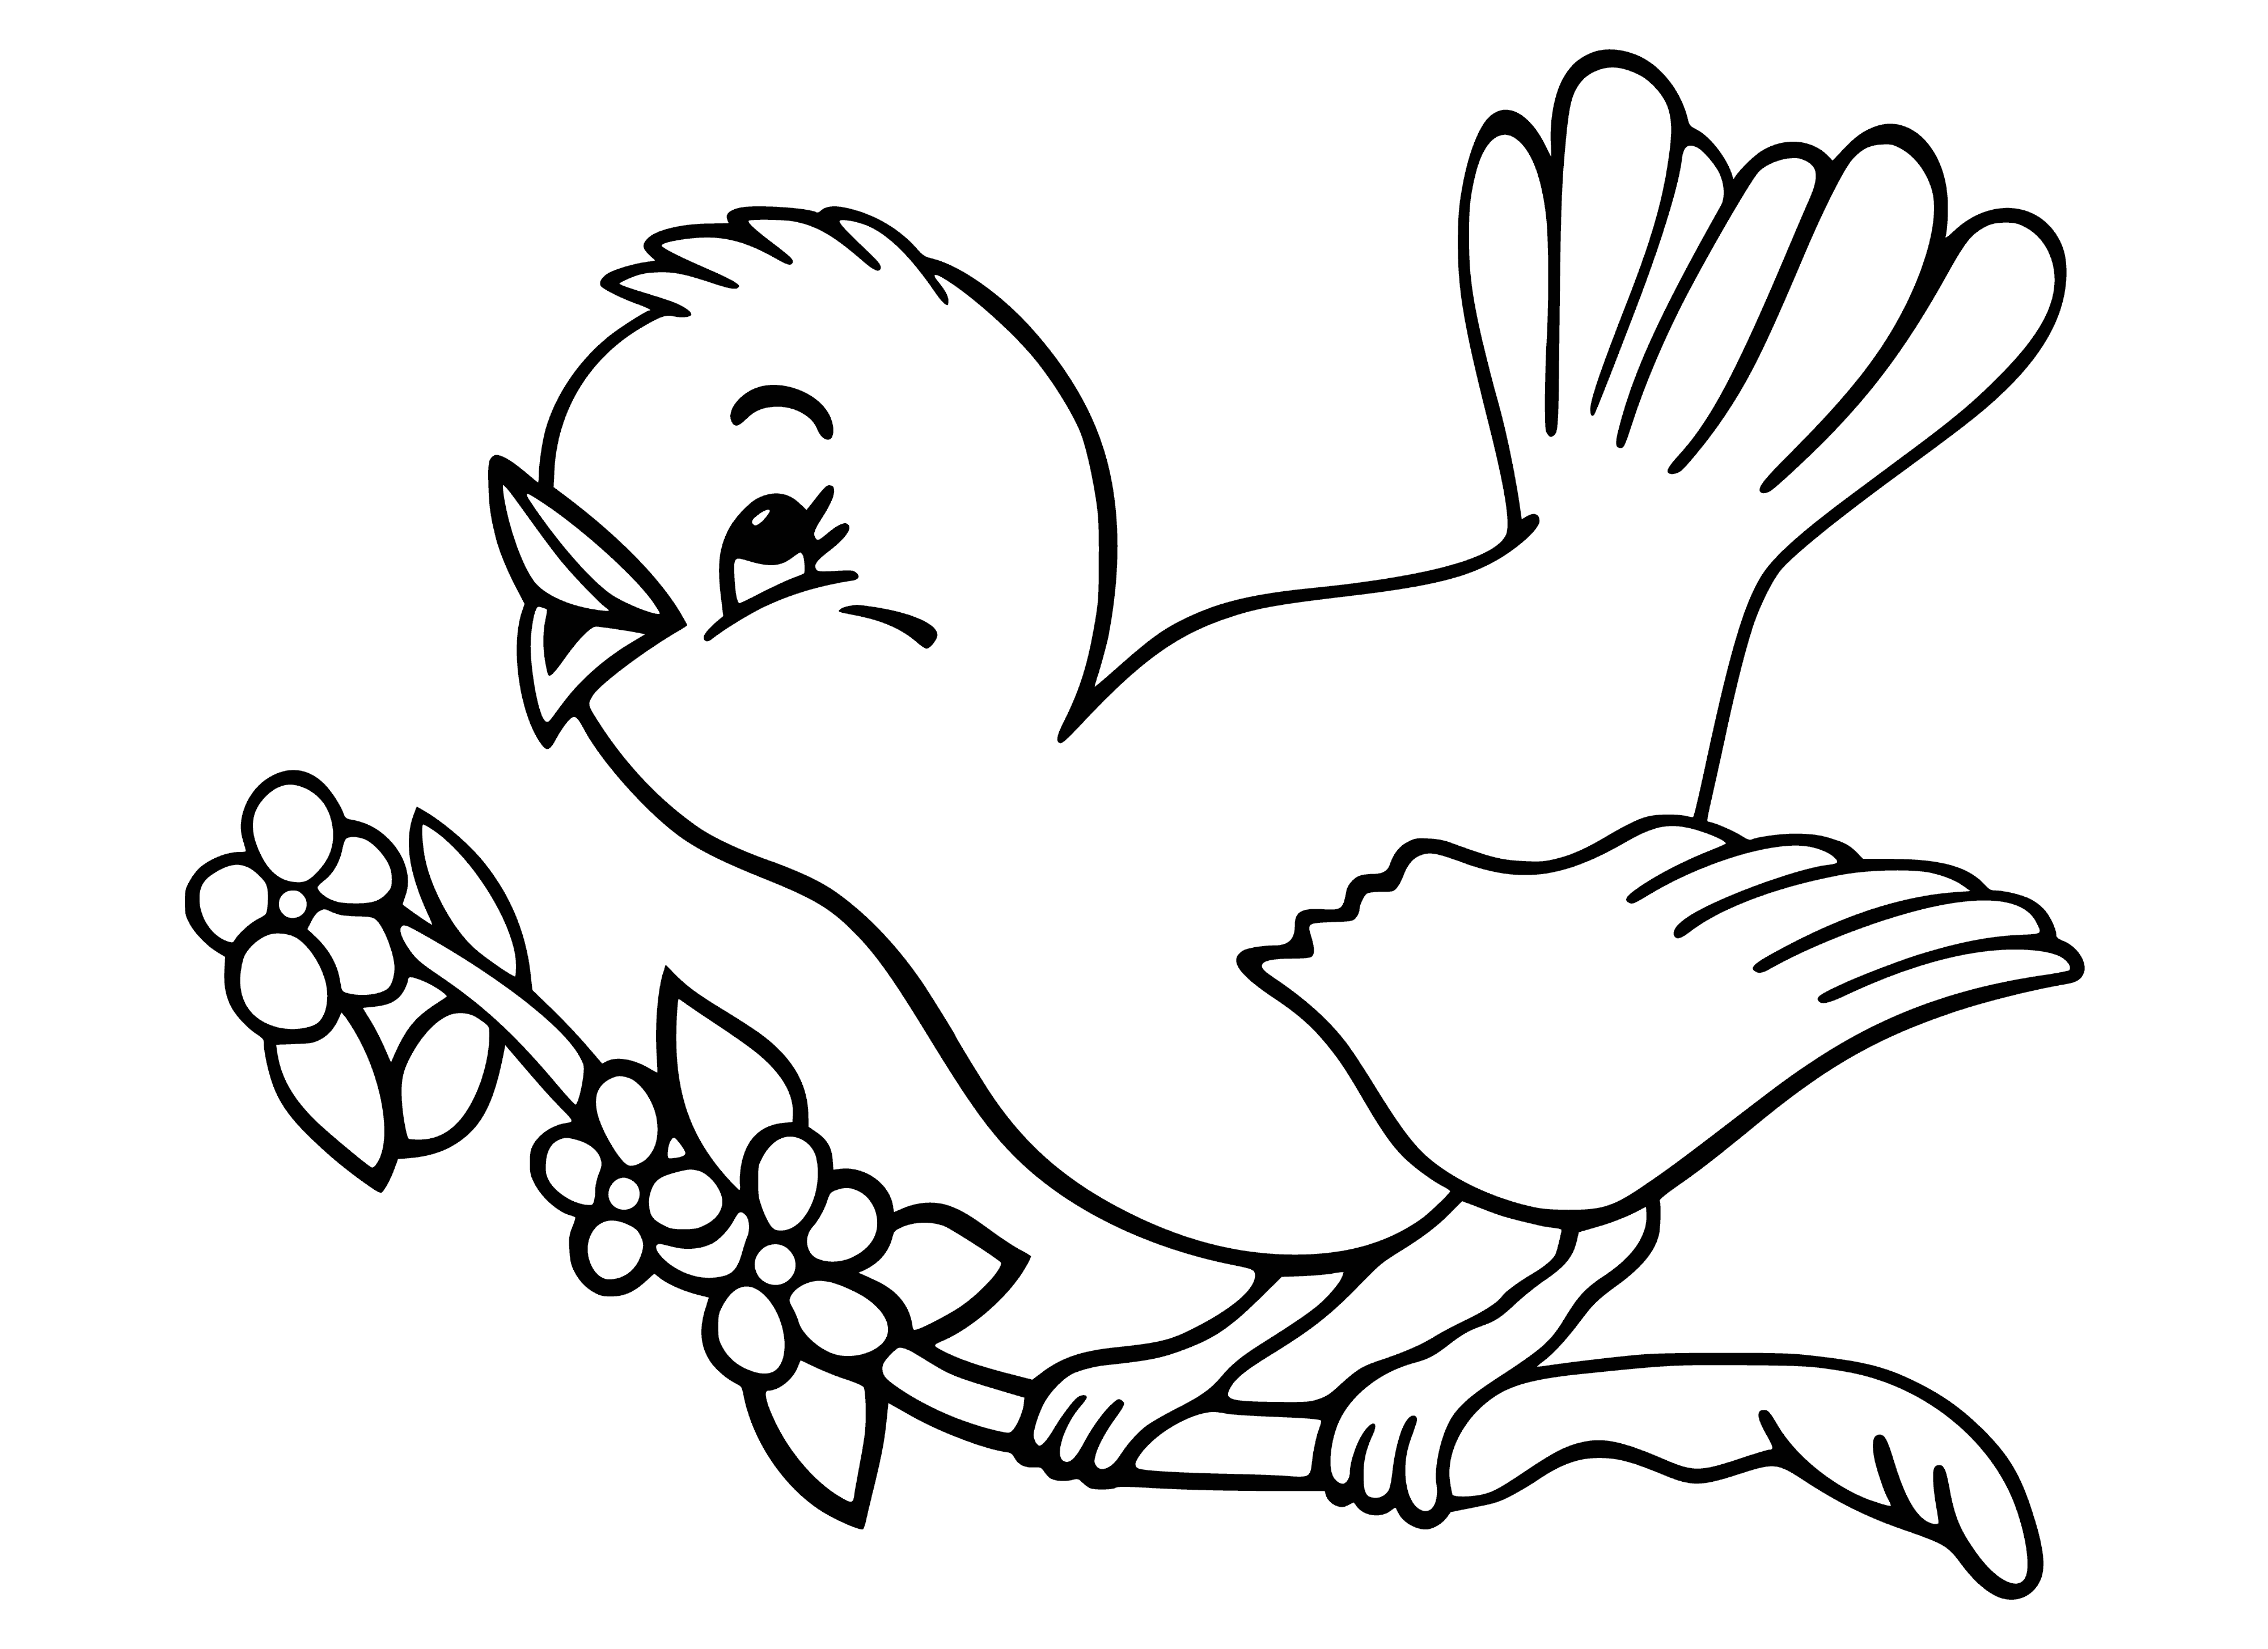 coloring page: A yellow bird perched on a green branch, green spiral w/ yellow center & red edges, purple triangle & pink oval.